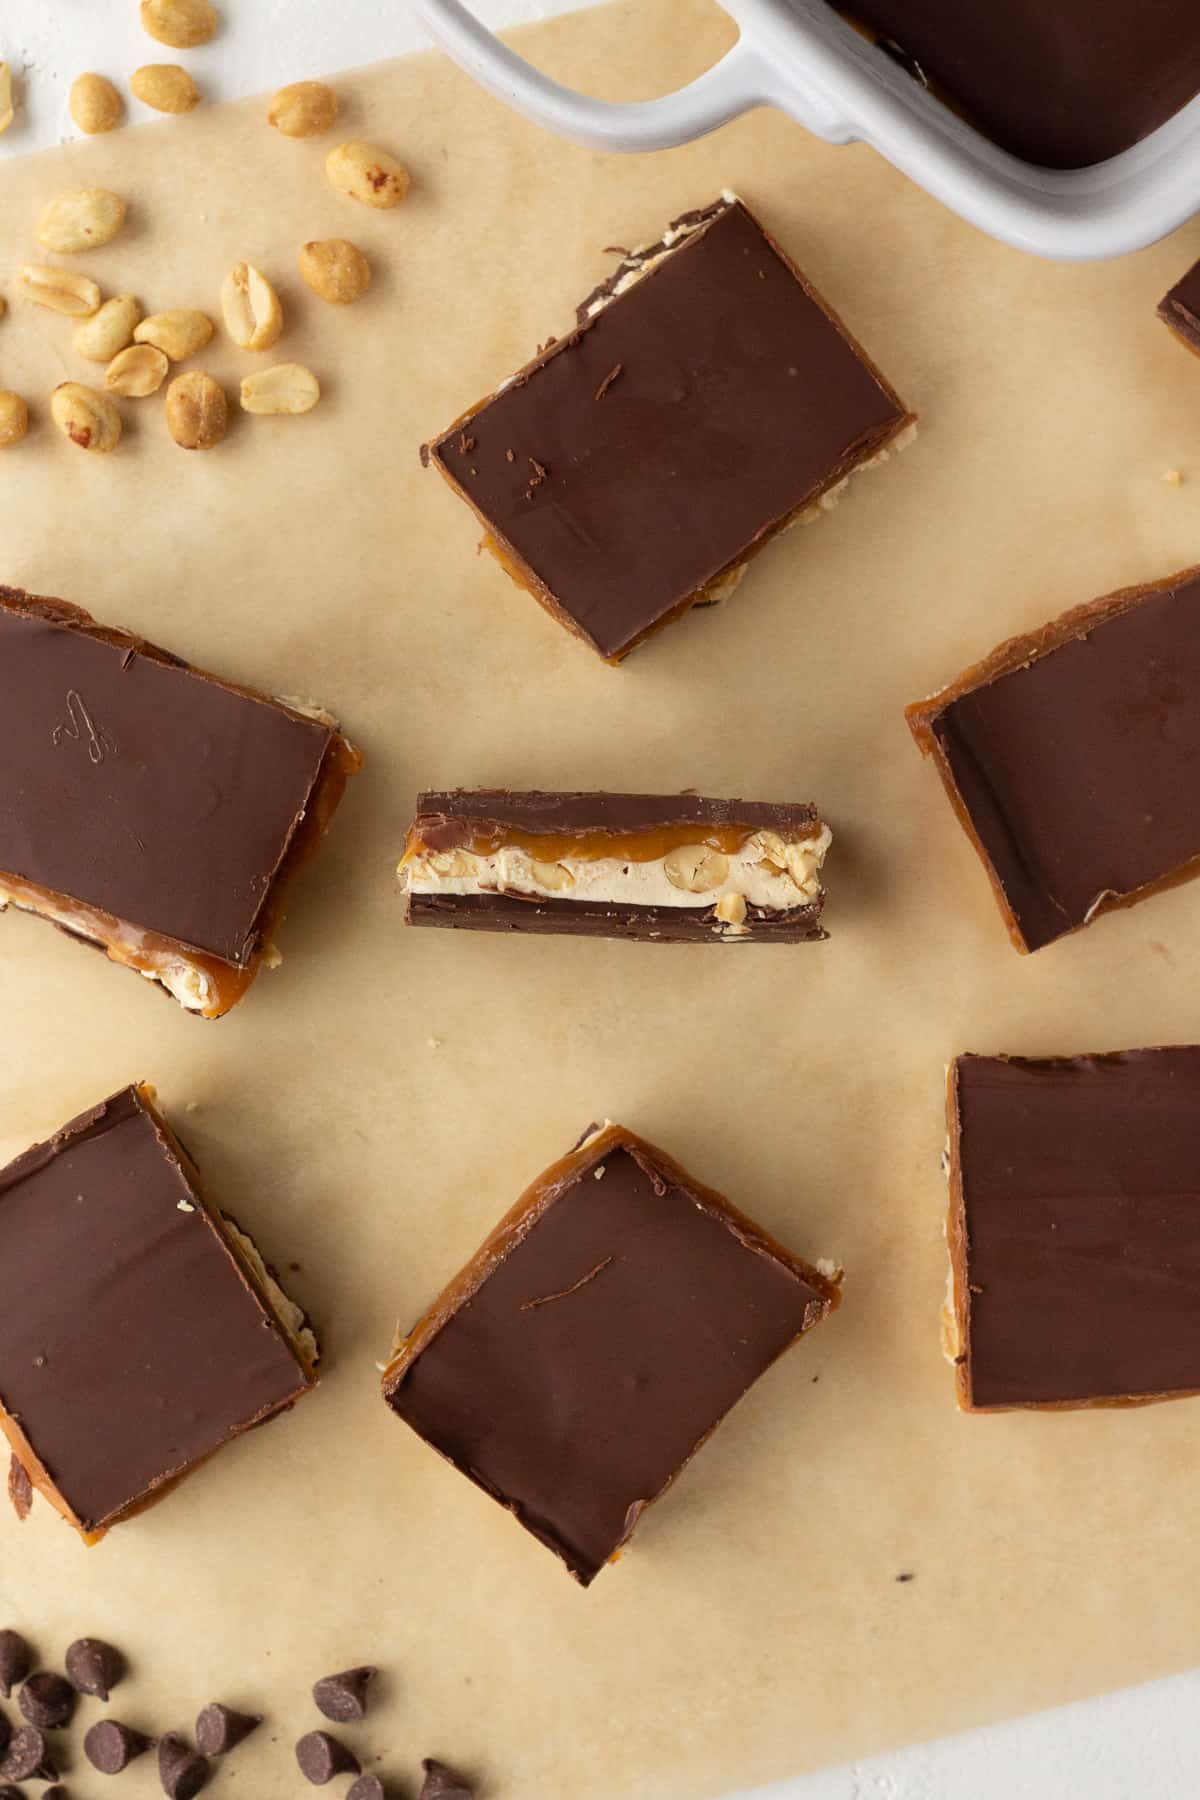 Top view of Snickers fudge lined up on parchment.